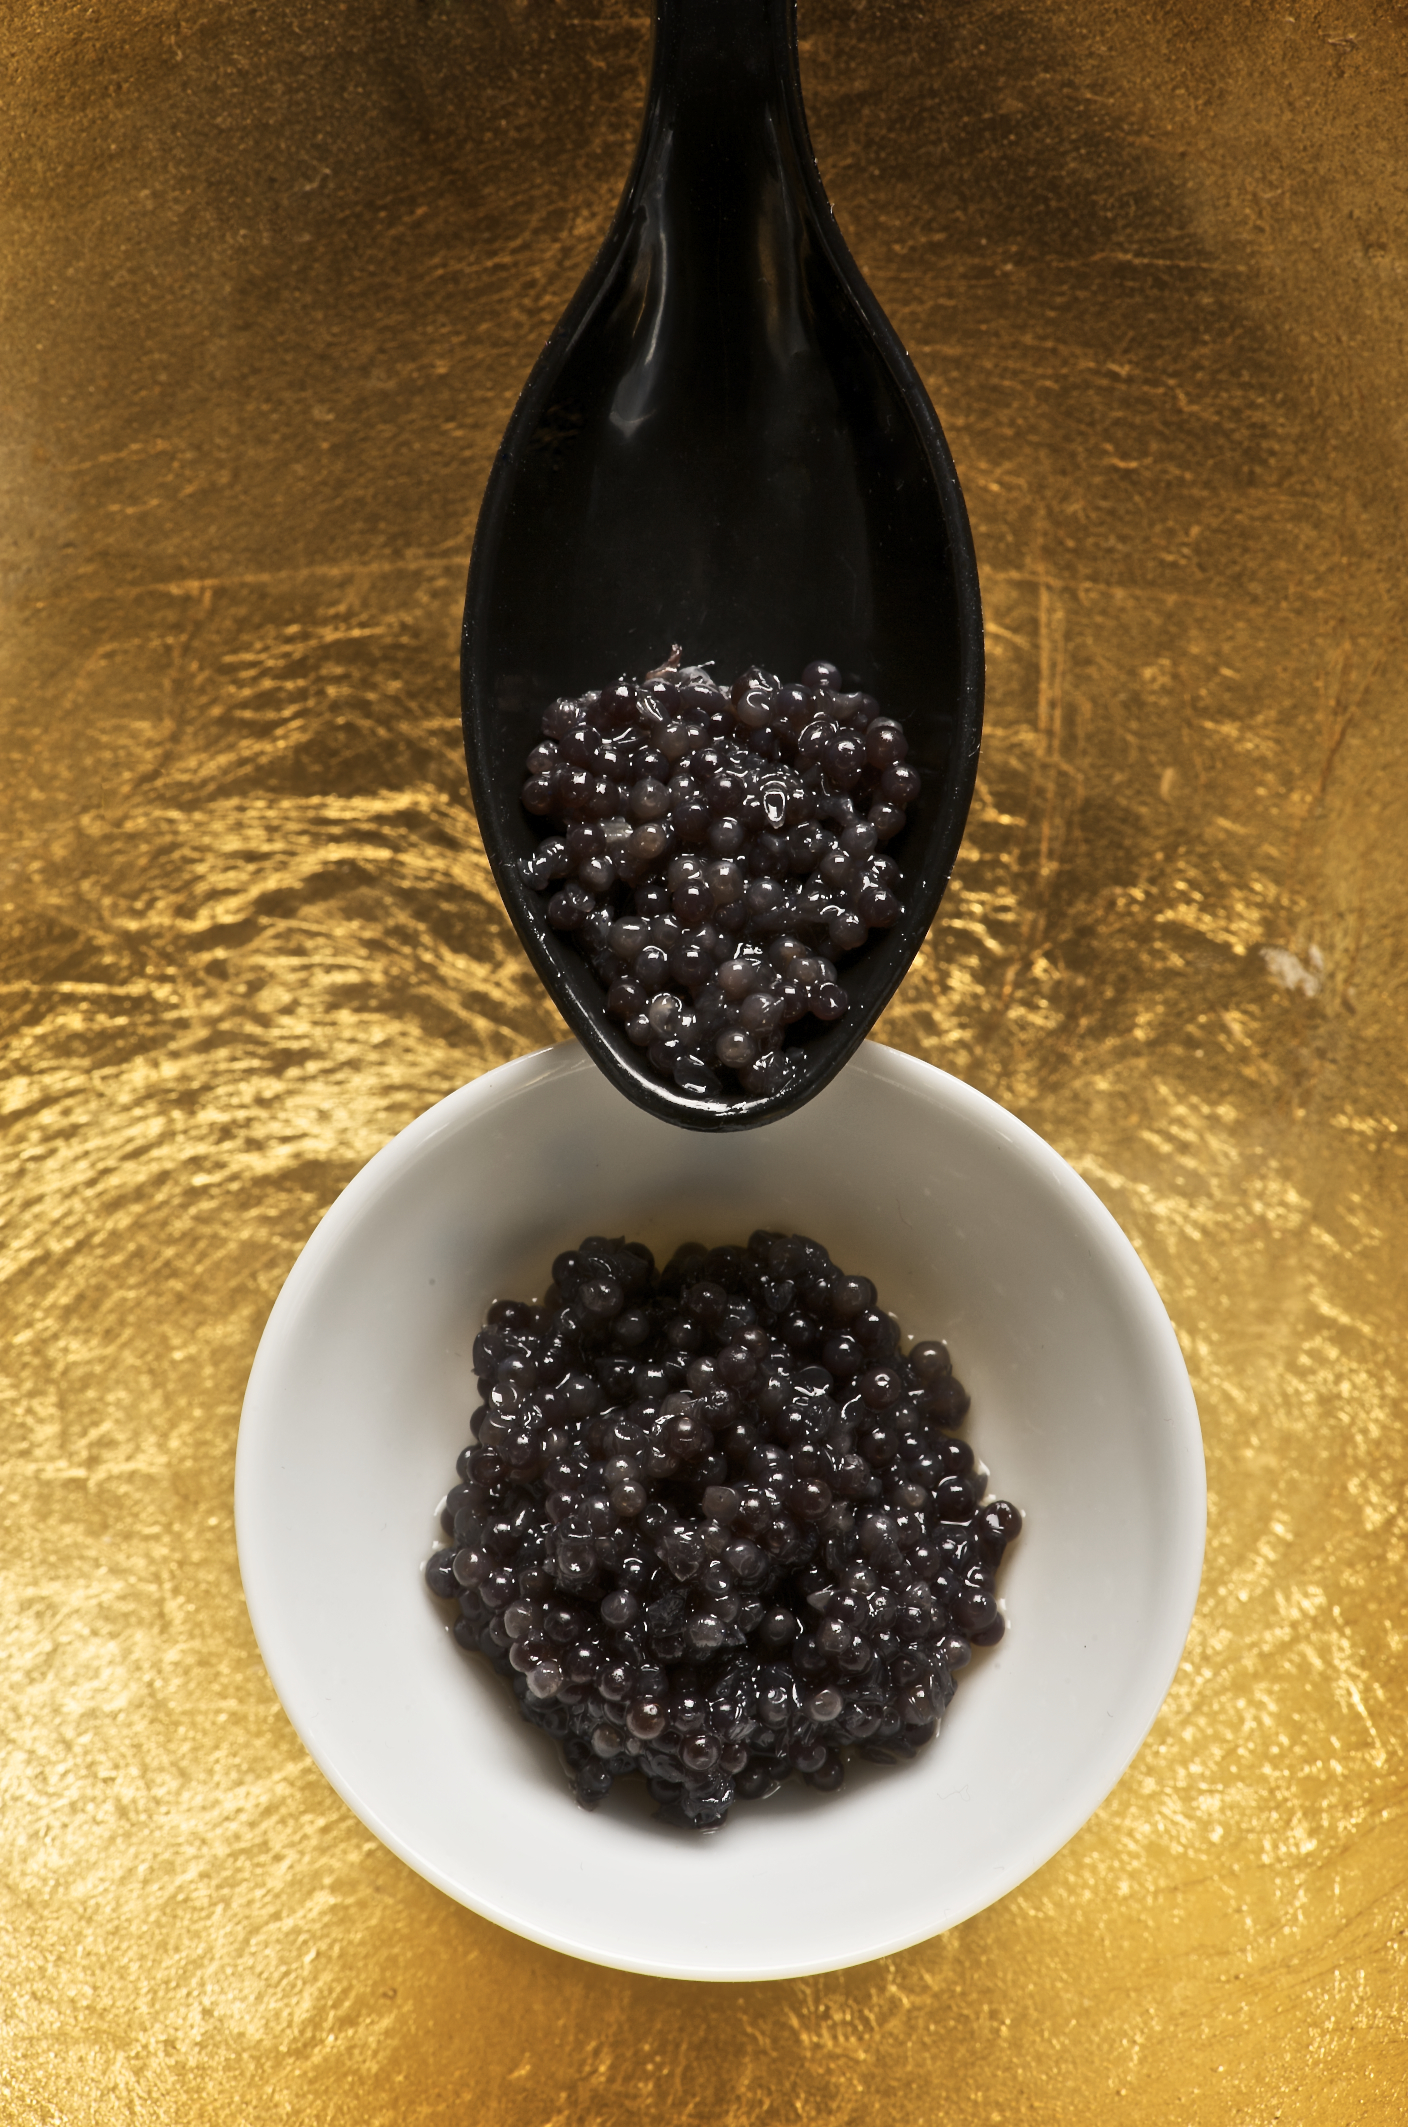 A spoonful of sturgeon caviar is held above a small bowl containing sturgeon caviar.